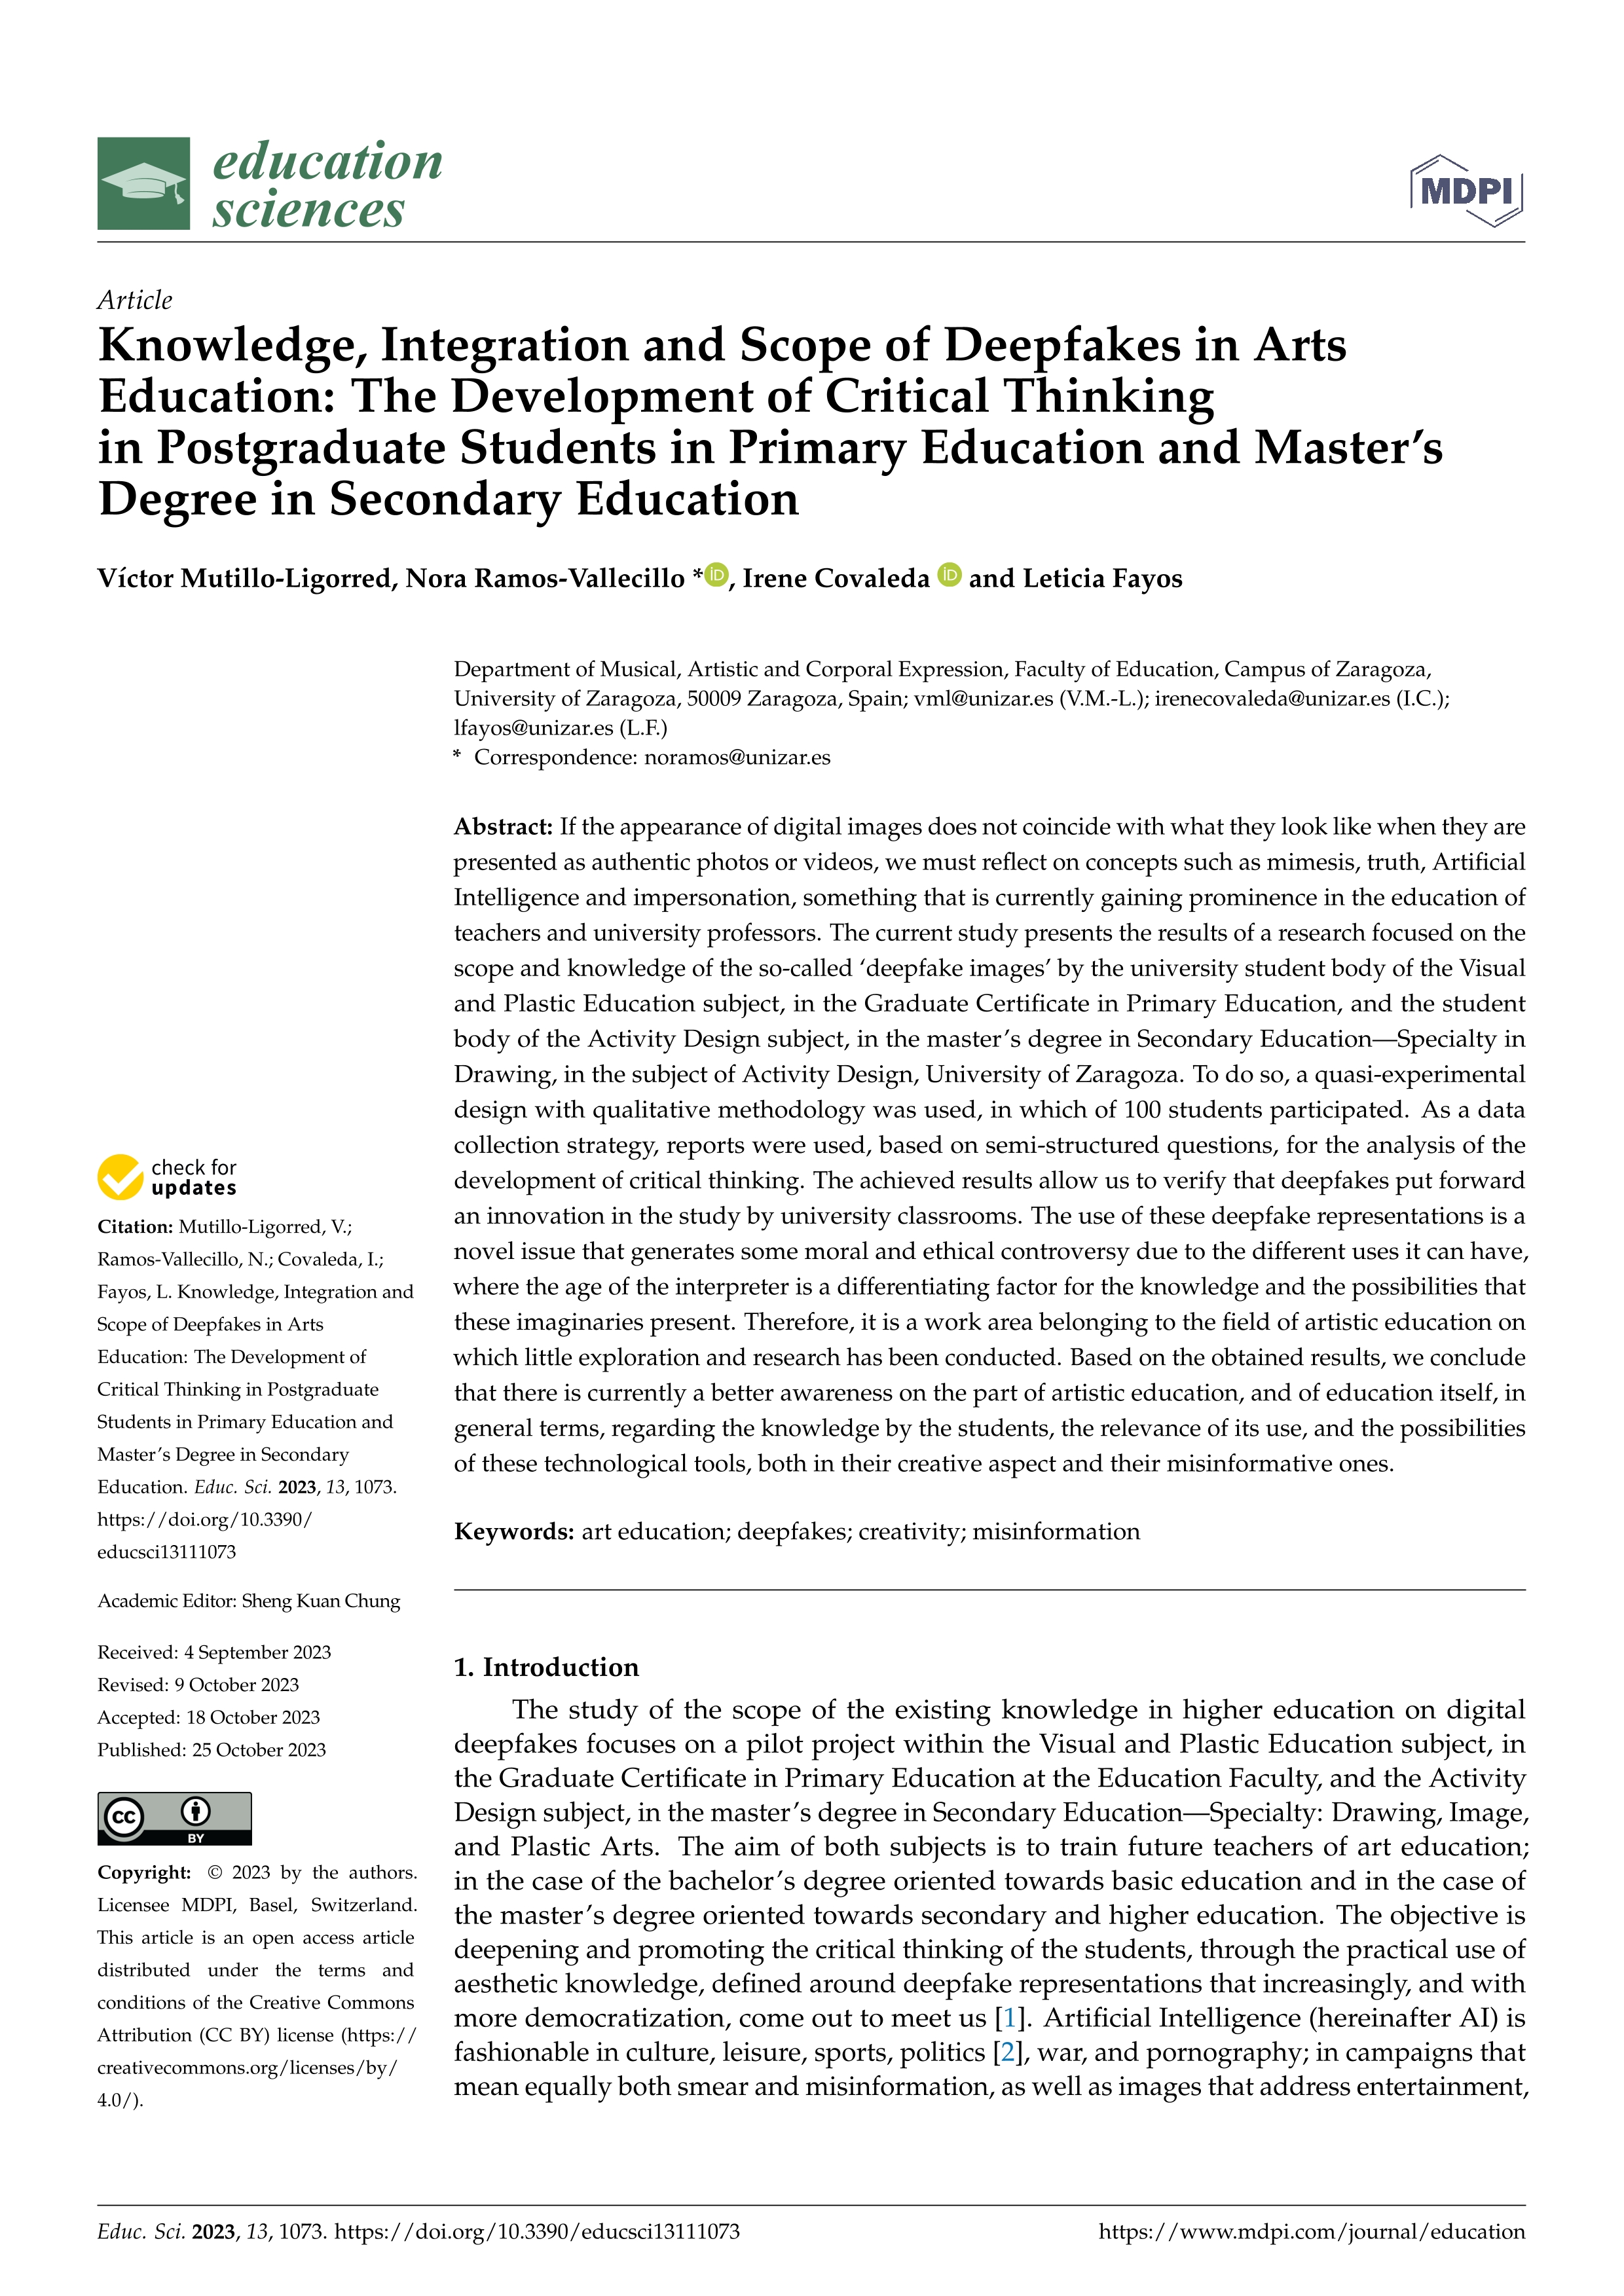 Knowledge, integration and scope of deepfakes in arts education: the development of critical thinking in postgraduate students in primary education and master’s degree in secondary education